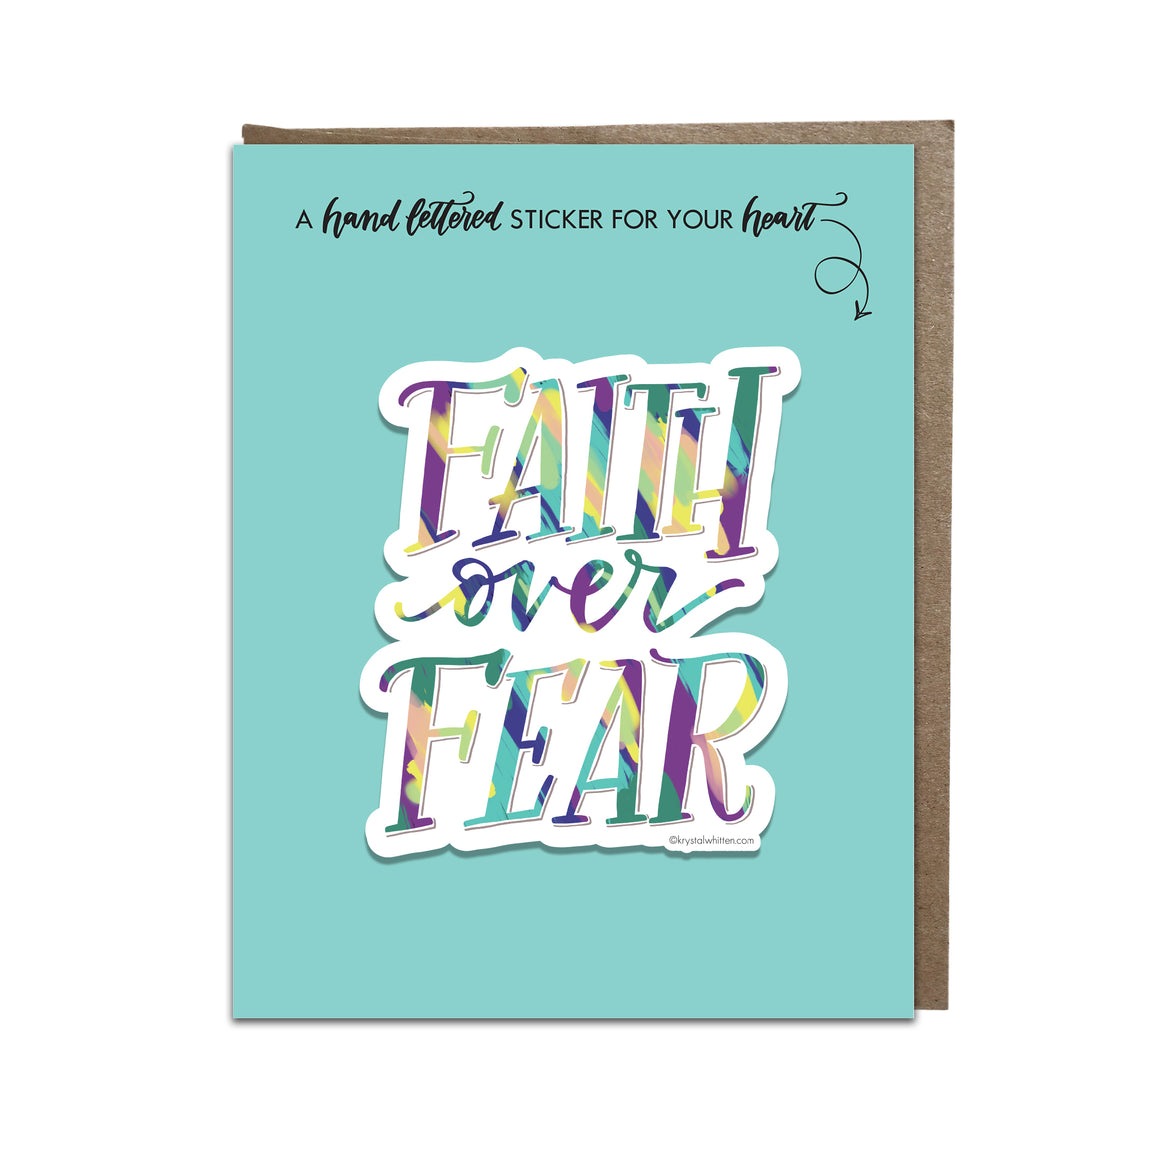 Bible journaling digital stickers. Faith quotes stickers set